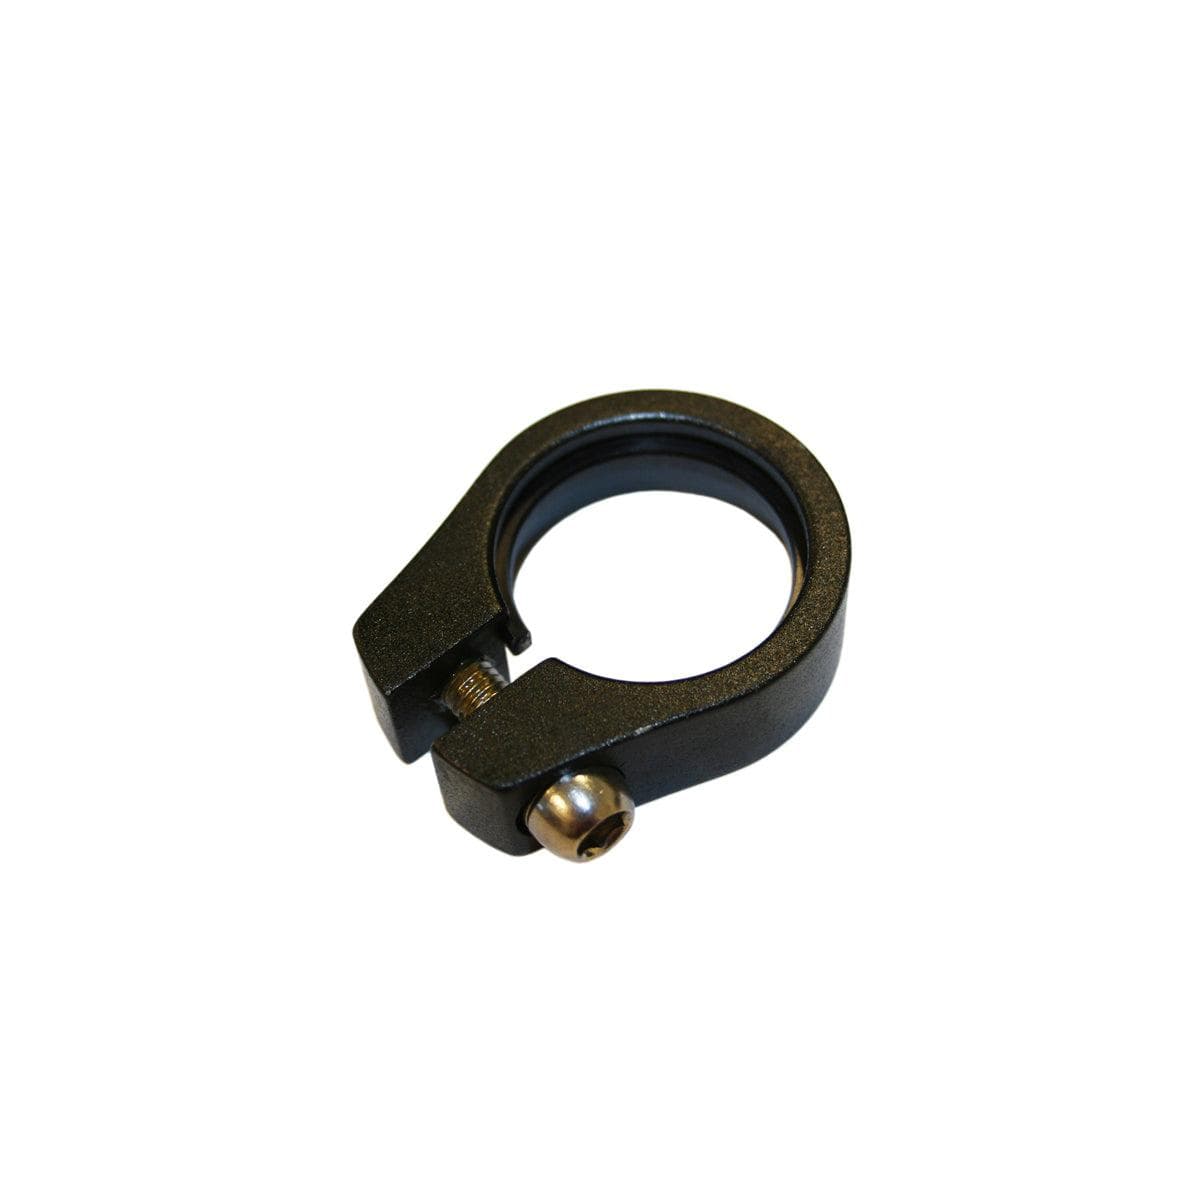 Look Spare - Seatpost Clamp Fits 585: